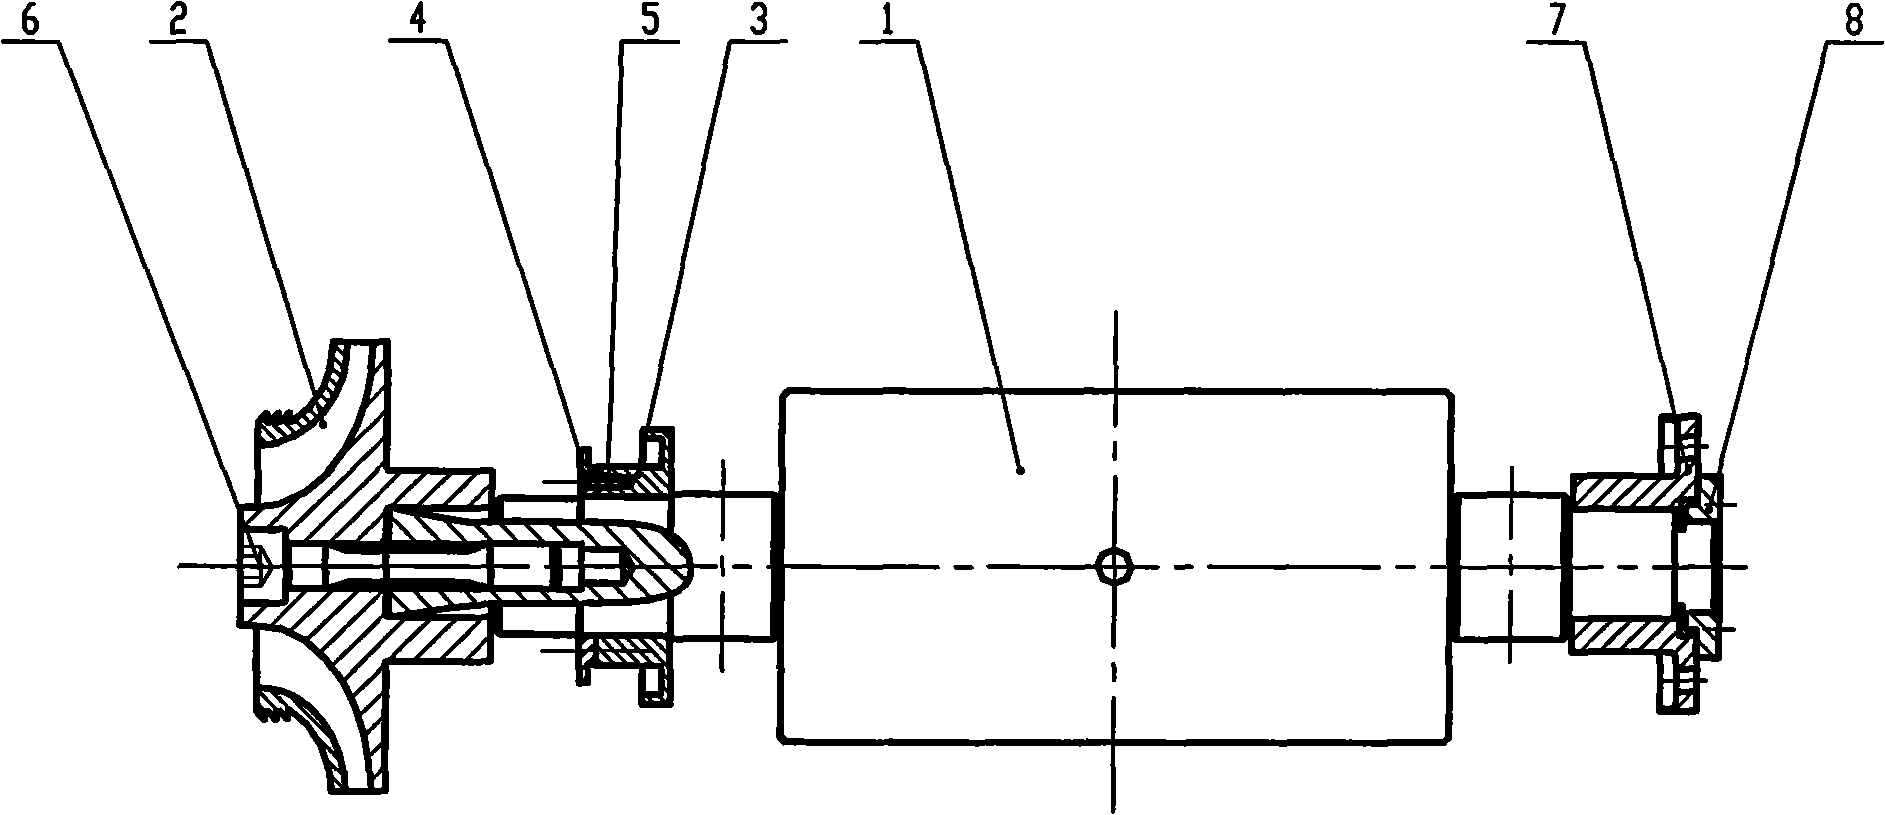 Expansion machine rotor for highly pressurized liquid throttling